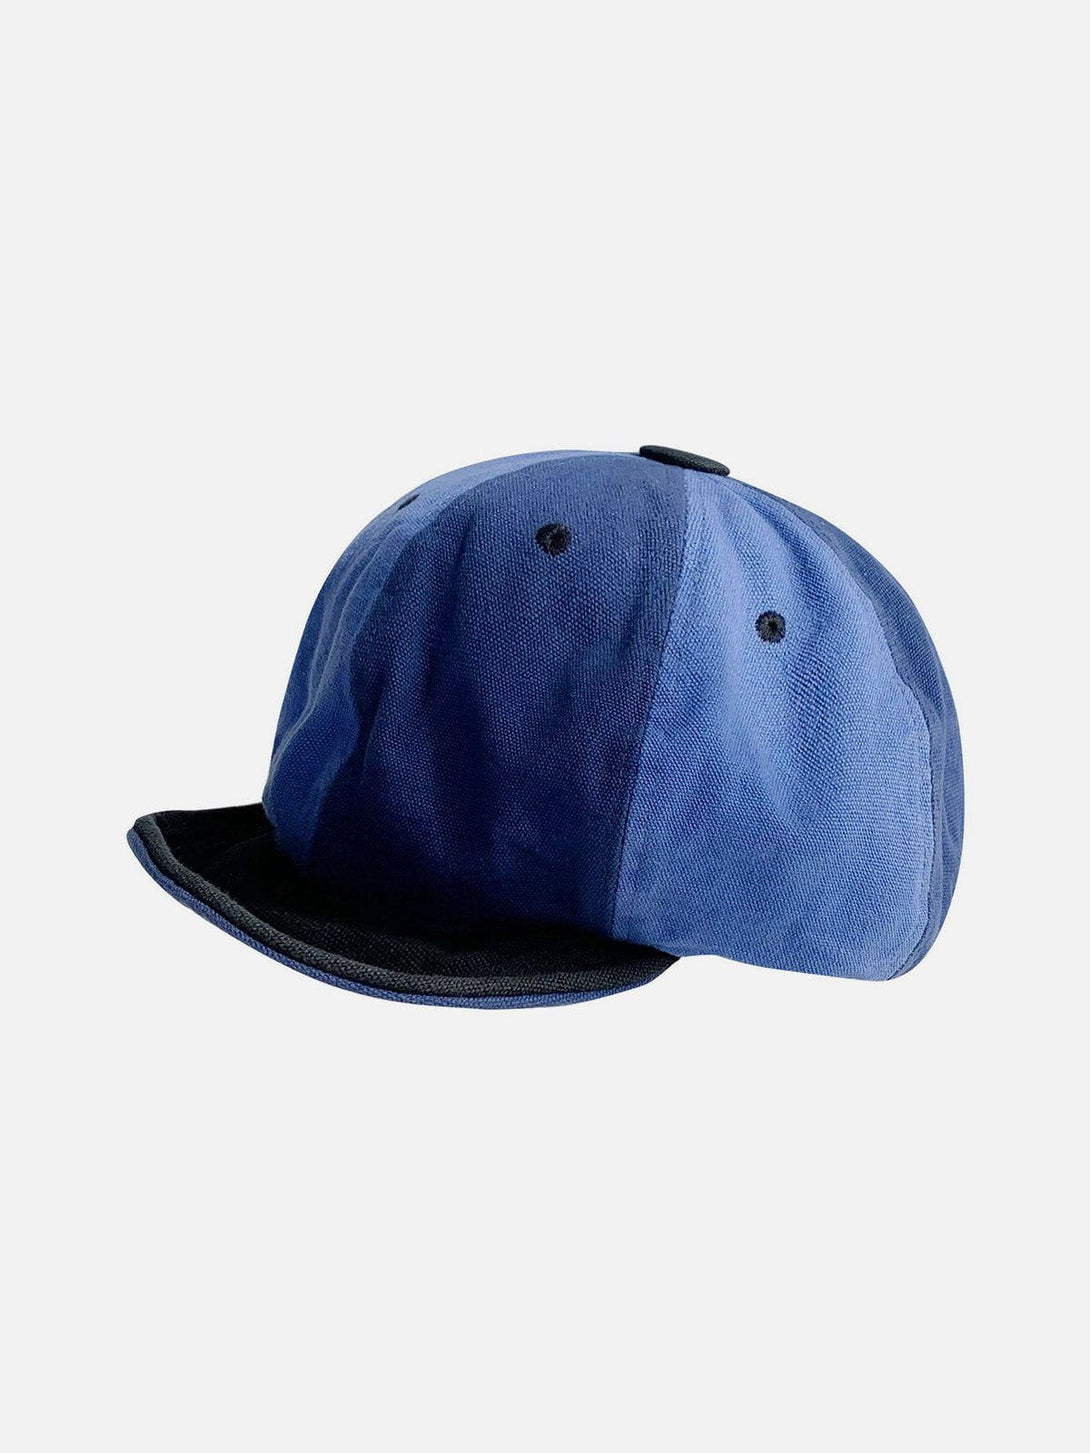 Levefly - Vintage Color Block Casual Hat - Streetwear Fashion - levefly.com